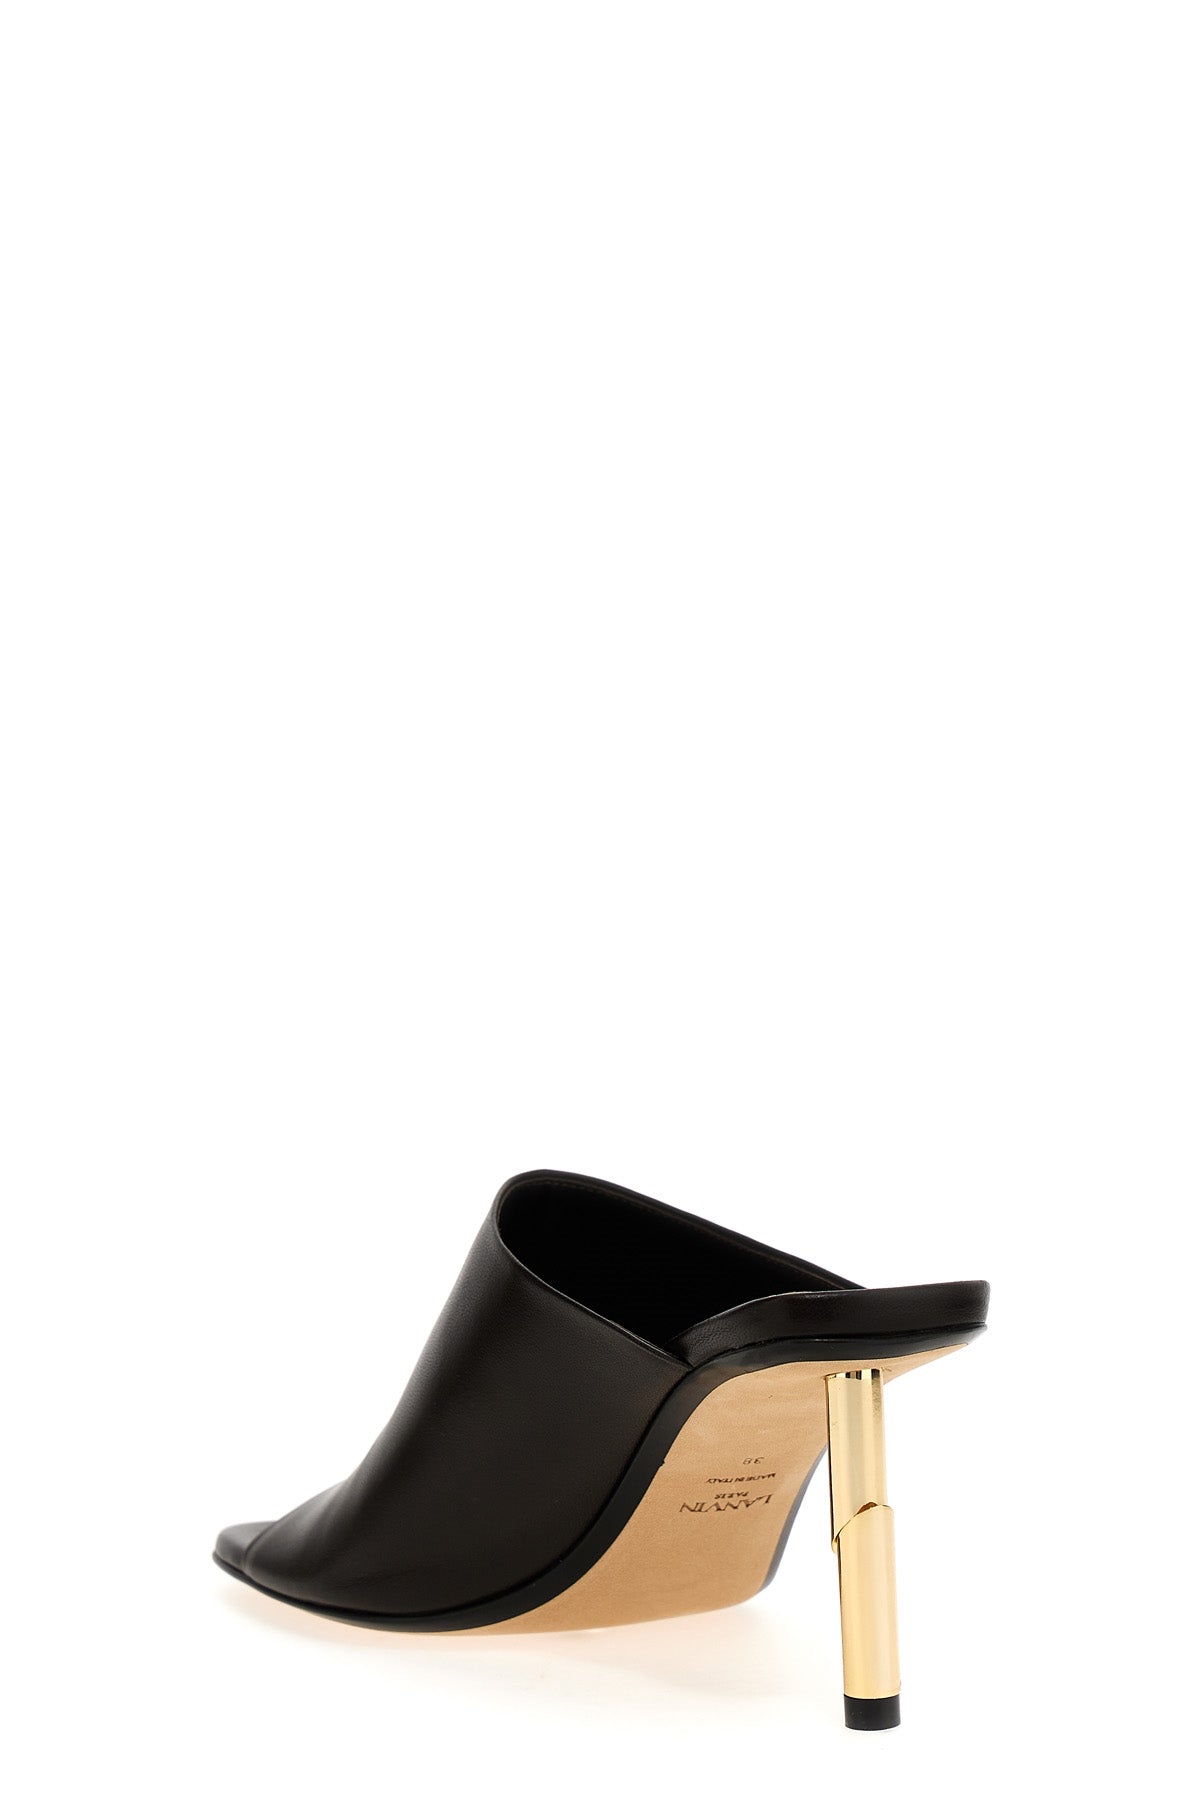 LANVIN 'SEQUENCE' MULES